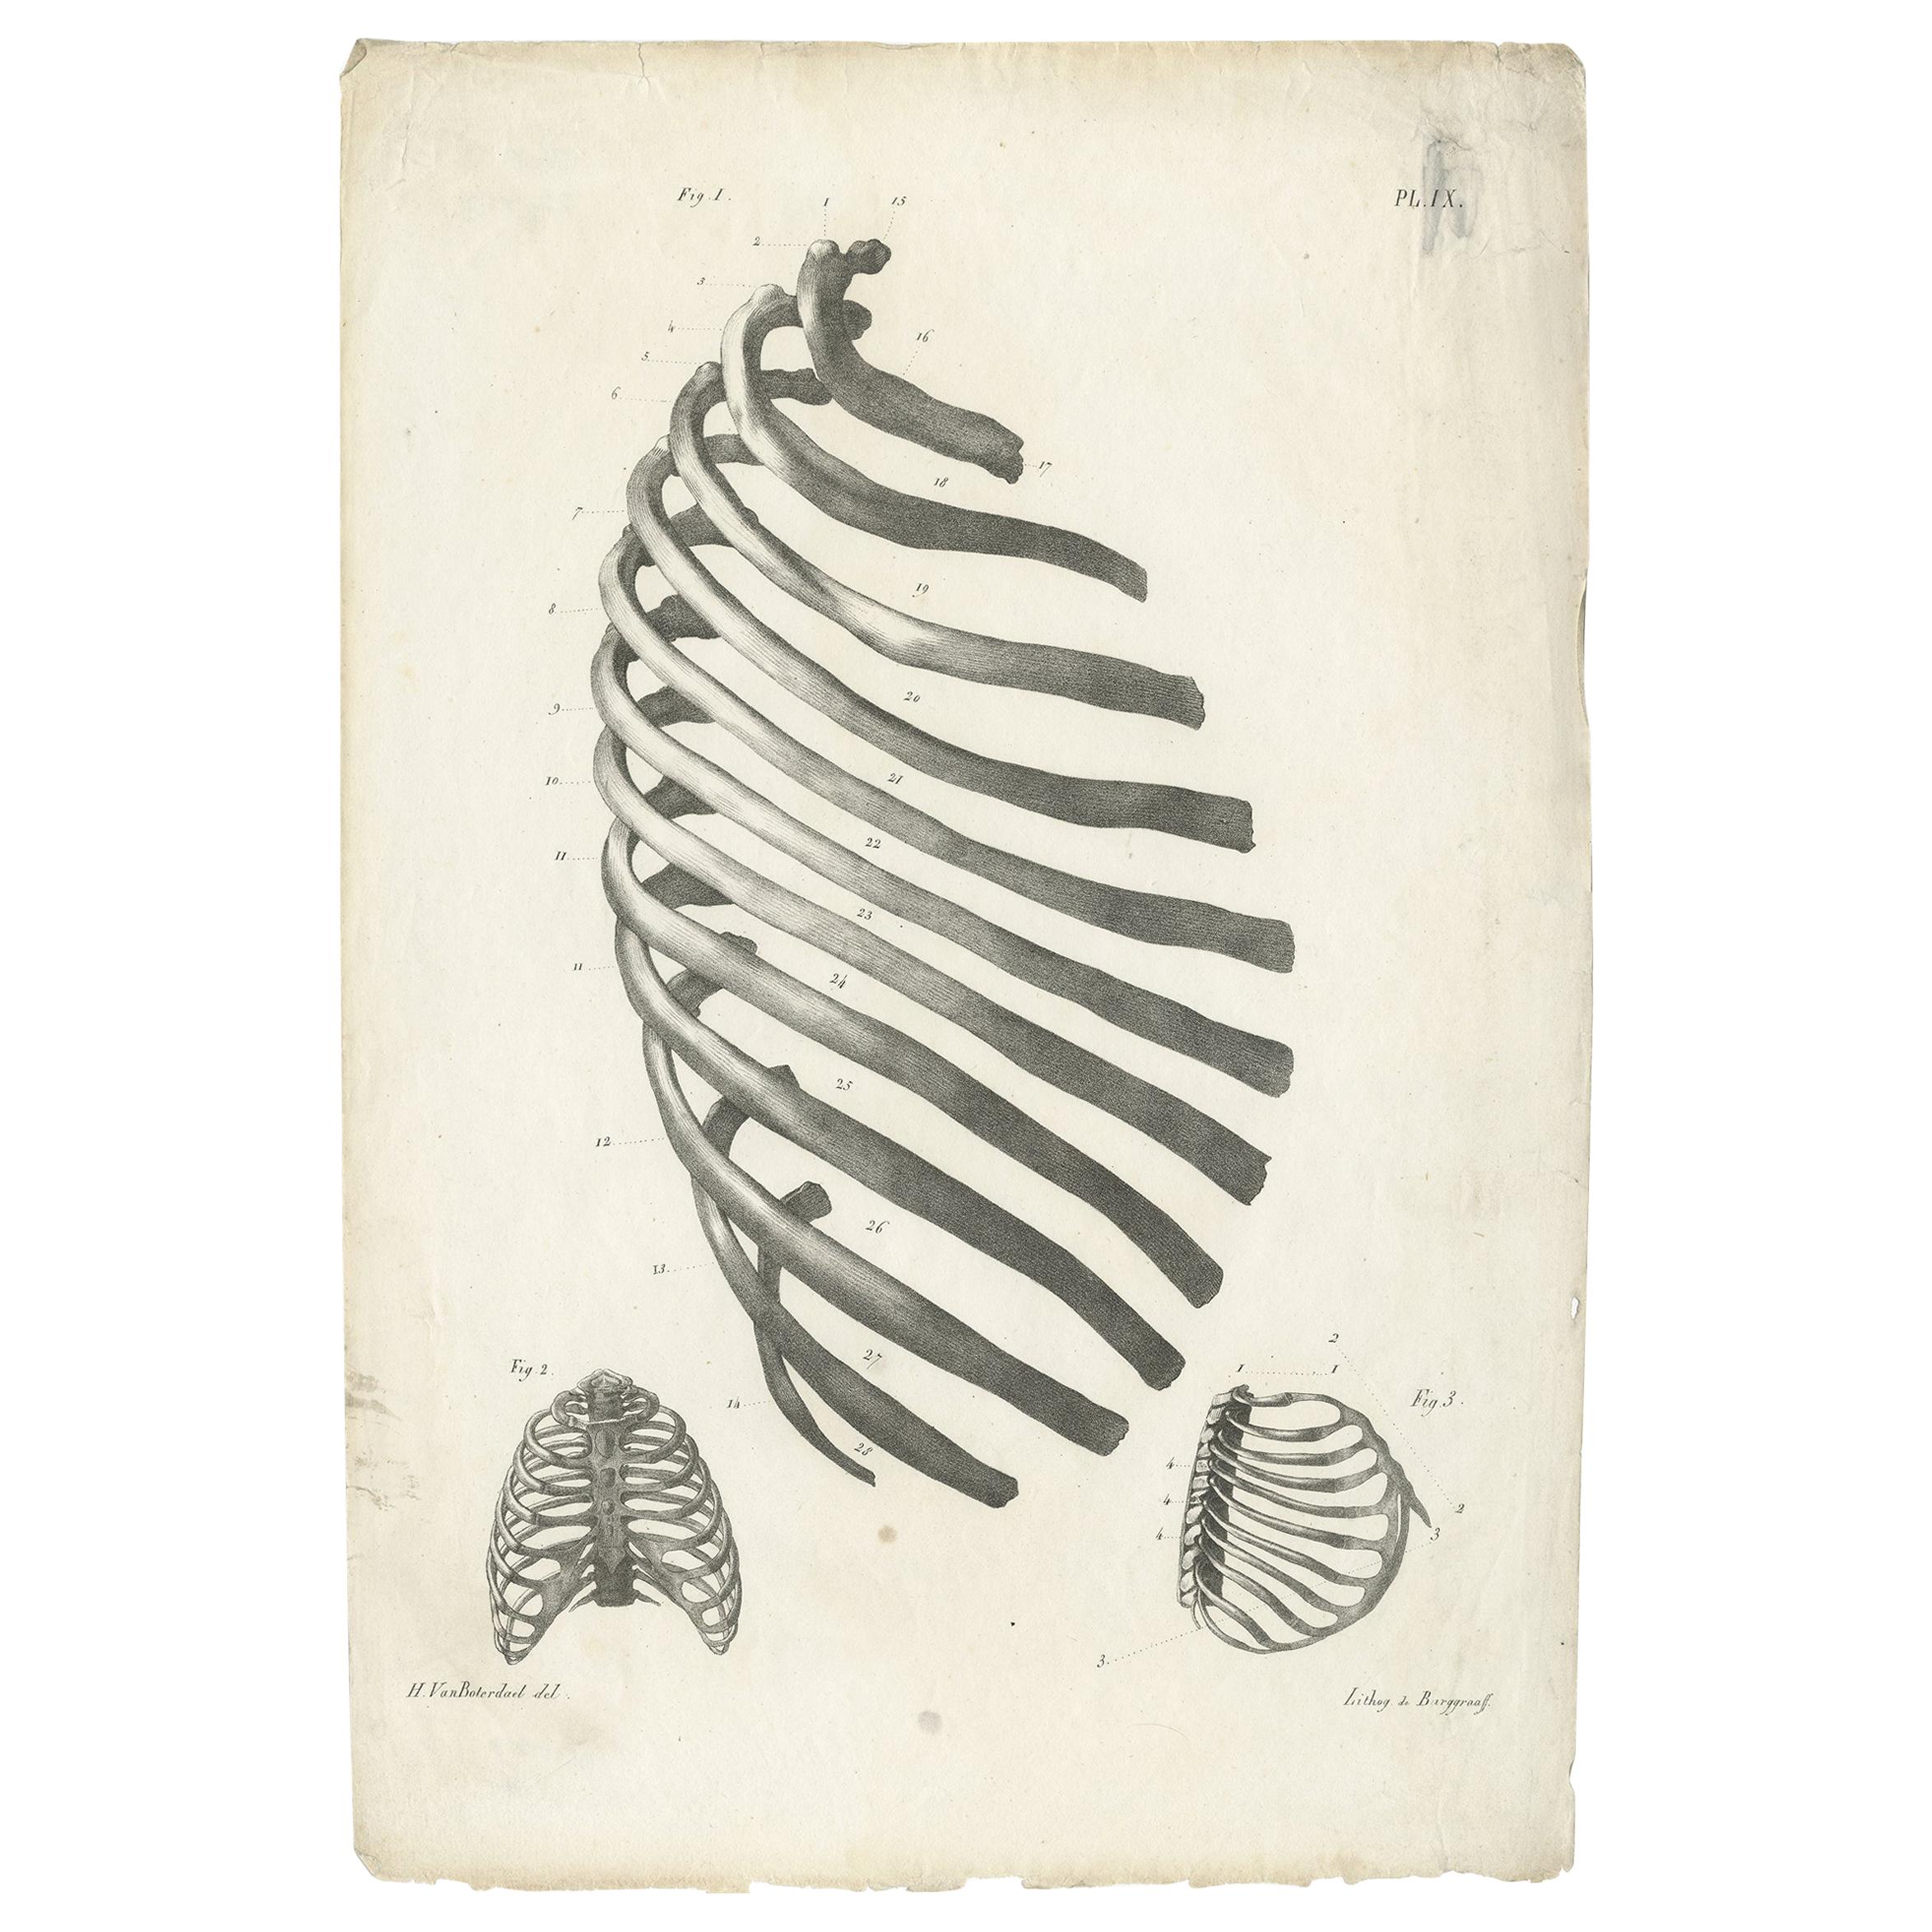 Pl. IX Antique Anatomy / Medical Print of the Rib Cage by Cloquet '1821' For Sale